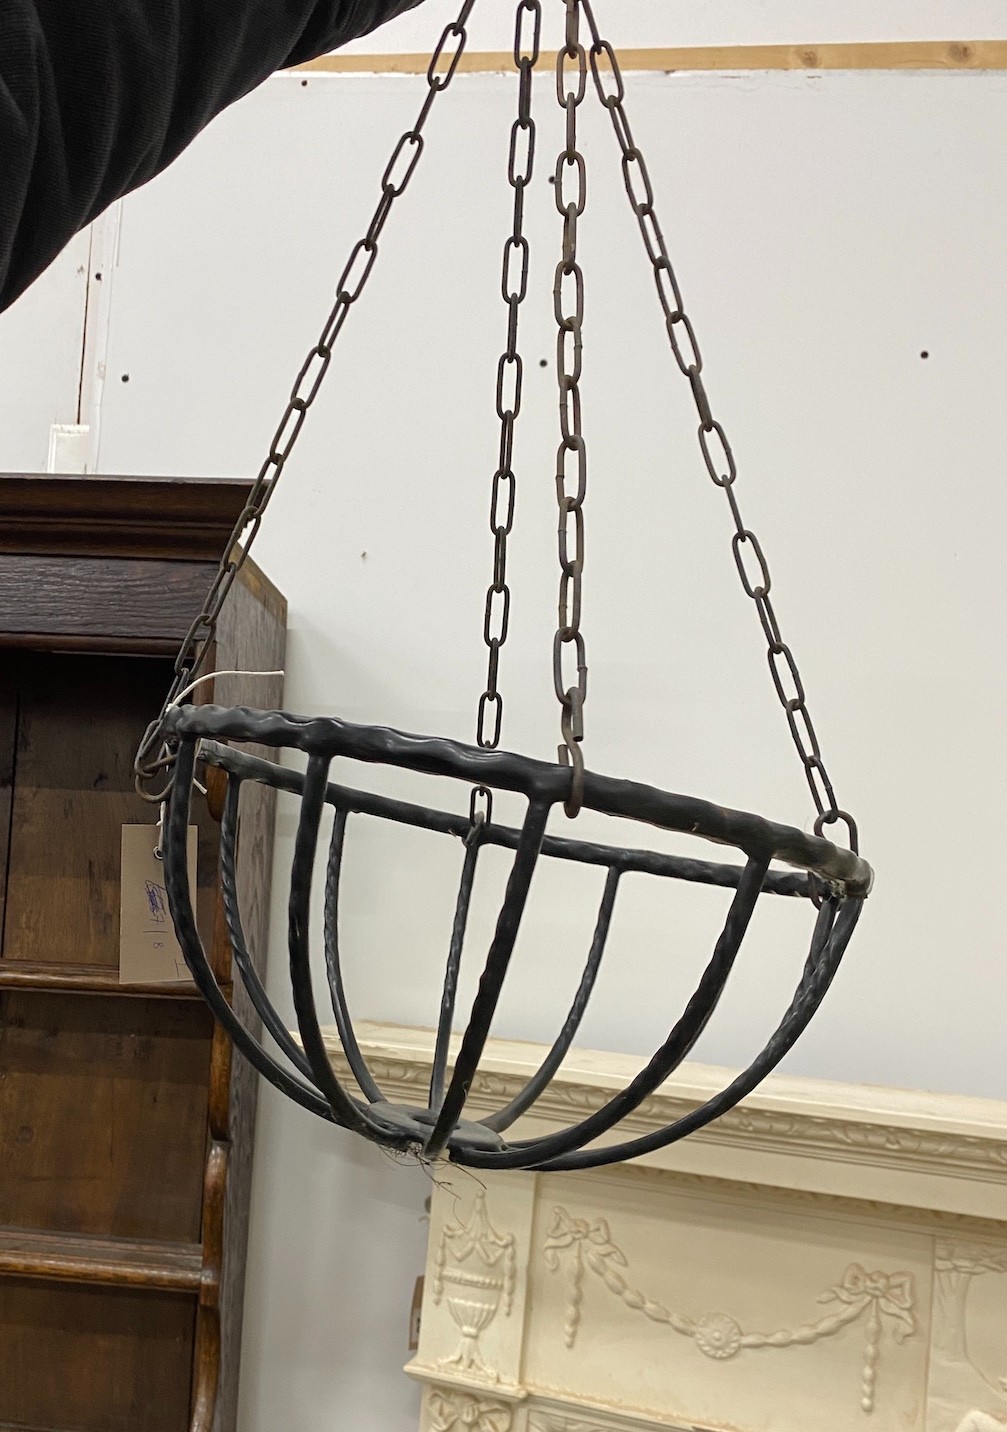 Three metal hanging baskets, a wall mounted pot holder and a stand